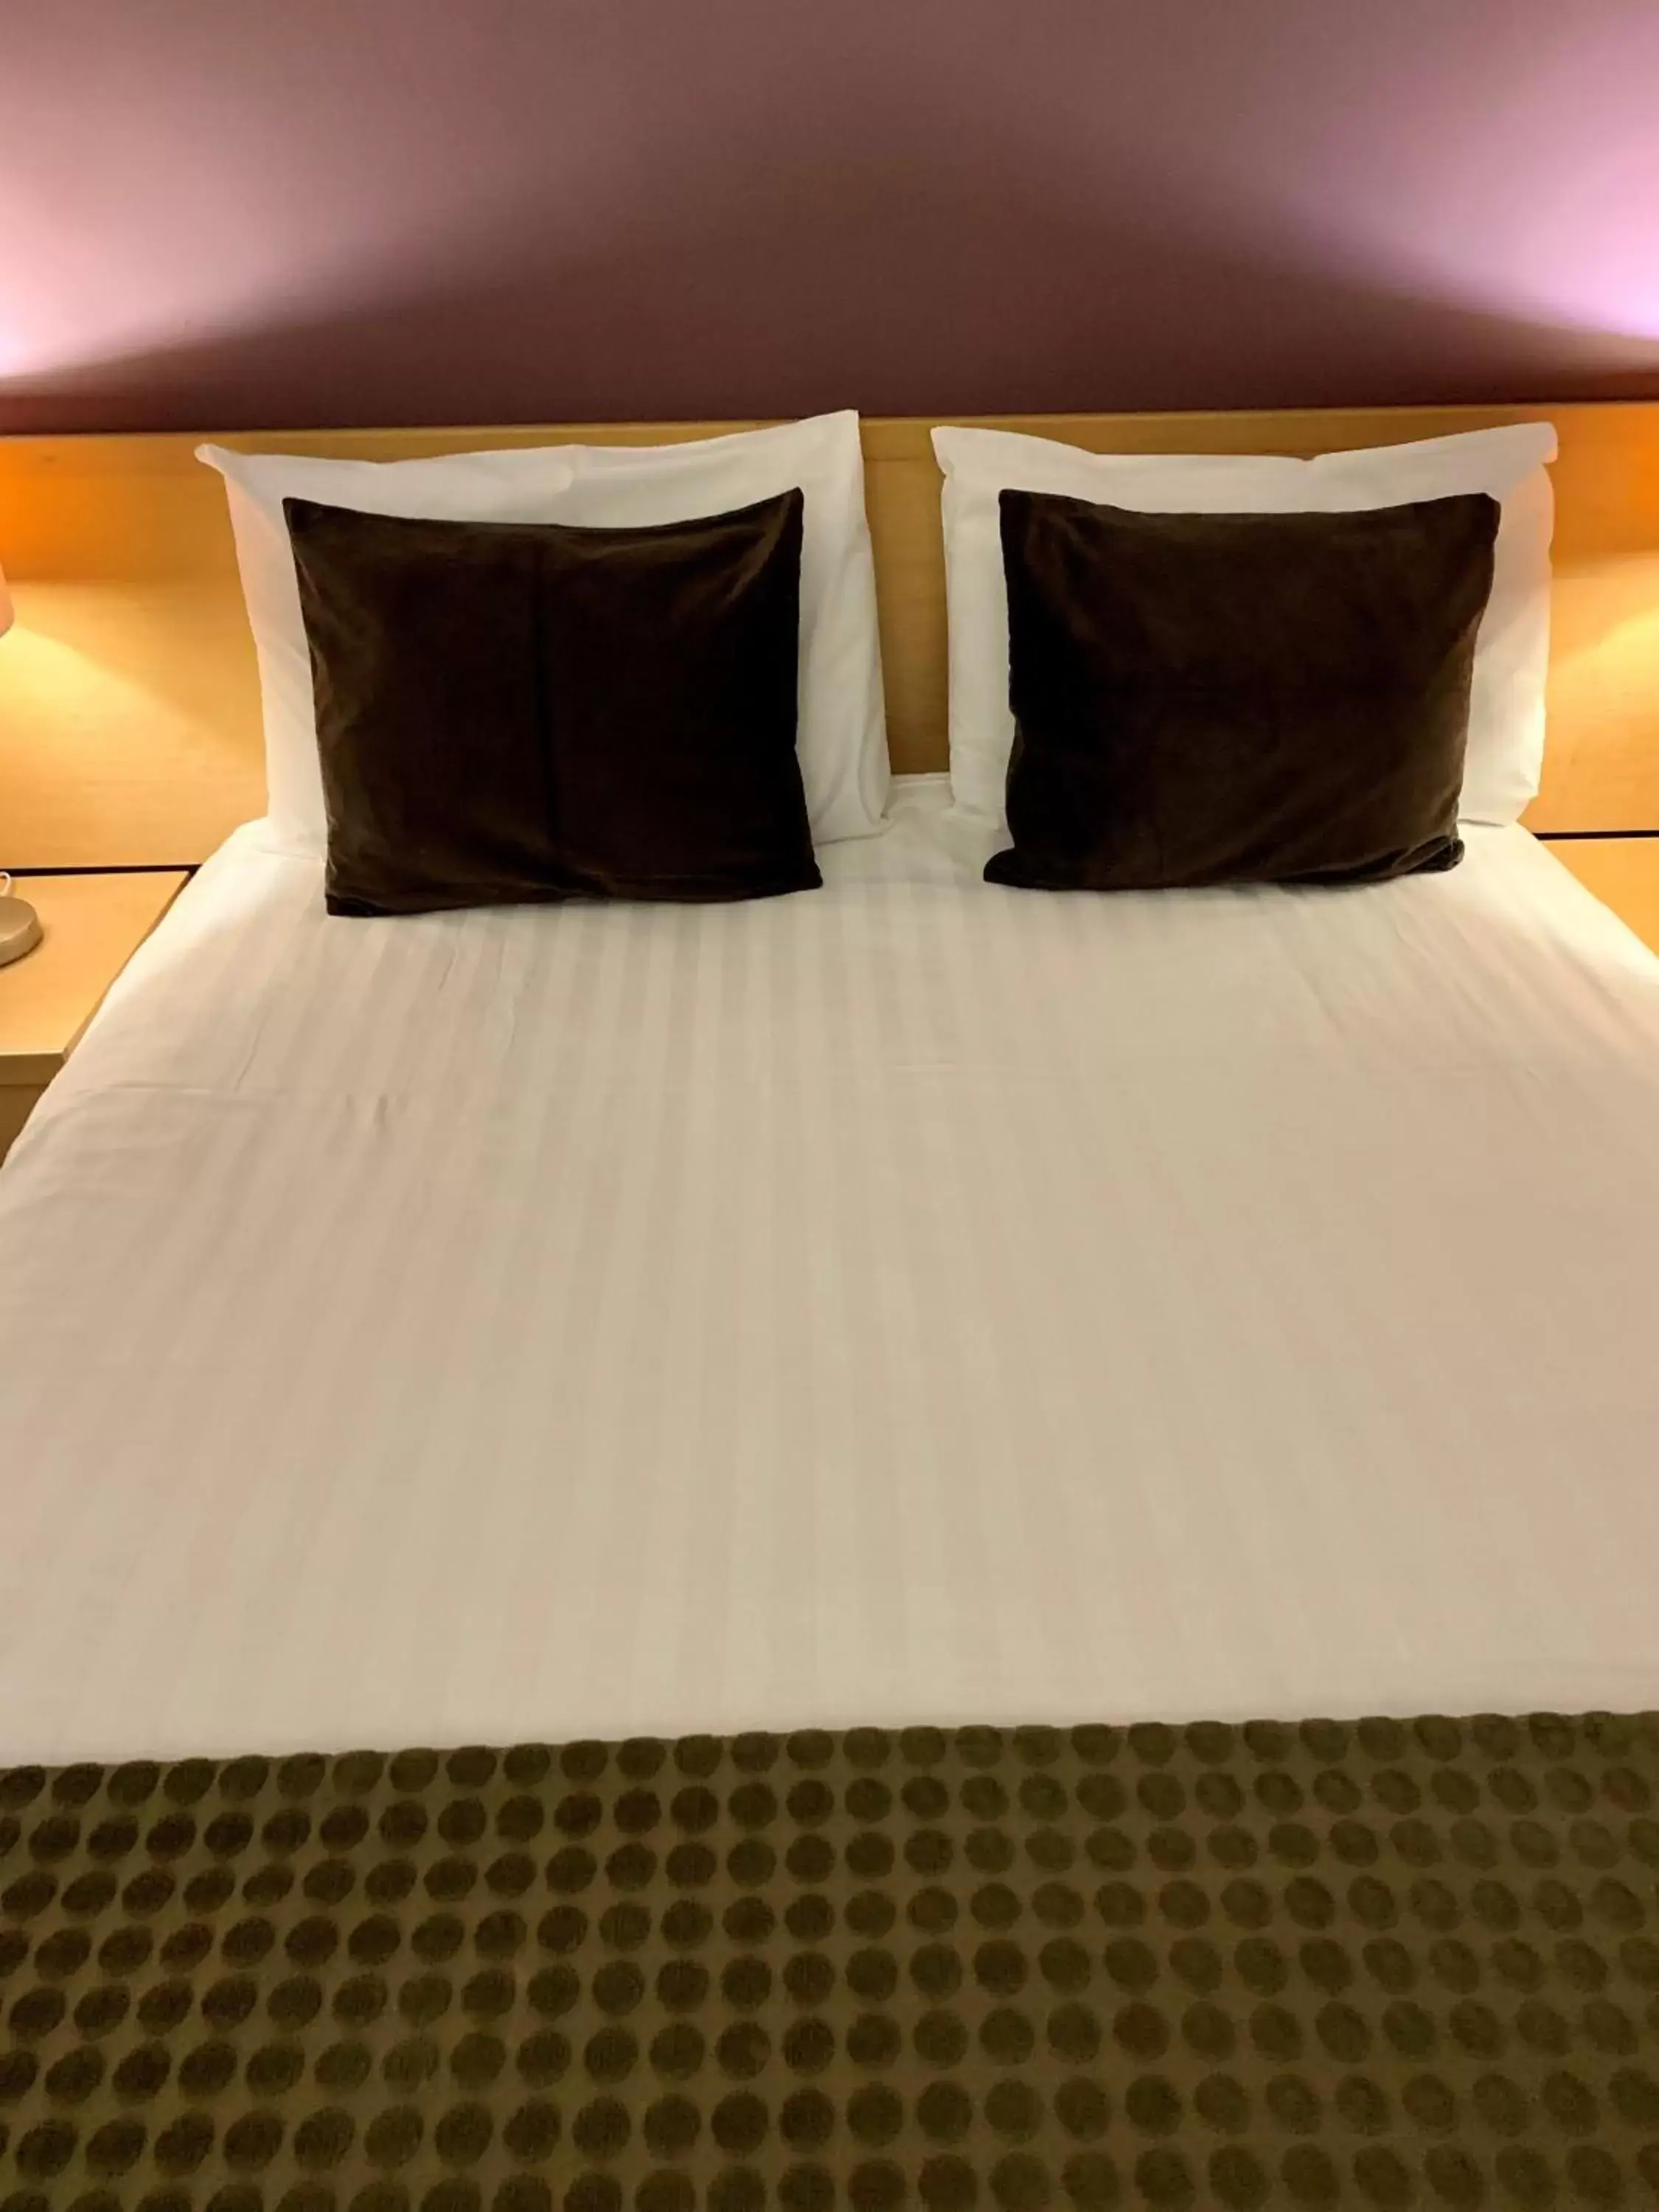 Bed in The Barn Hotel & Spa, Sure Hotel Collection by Best Western